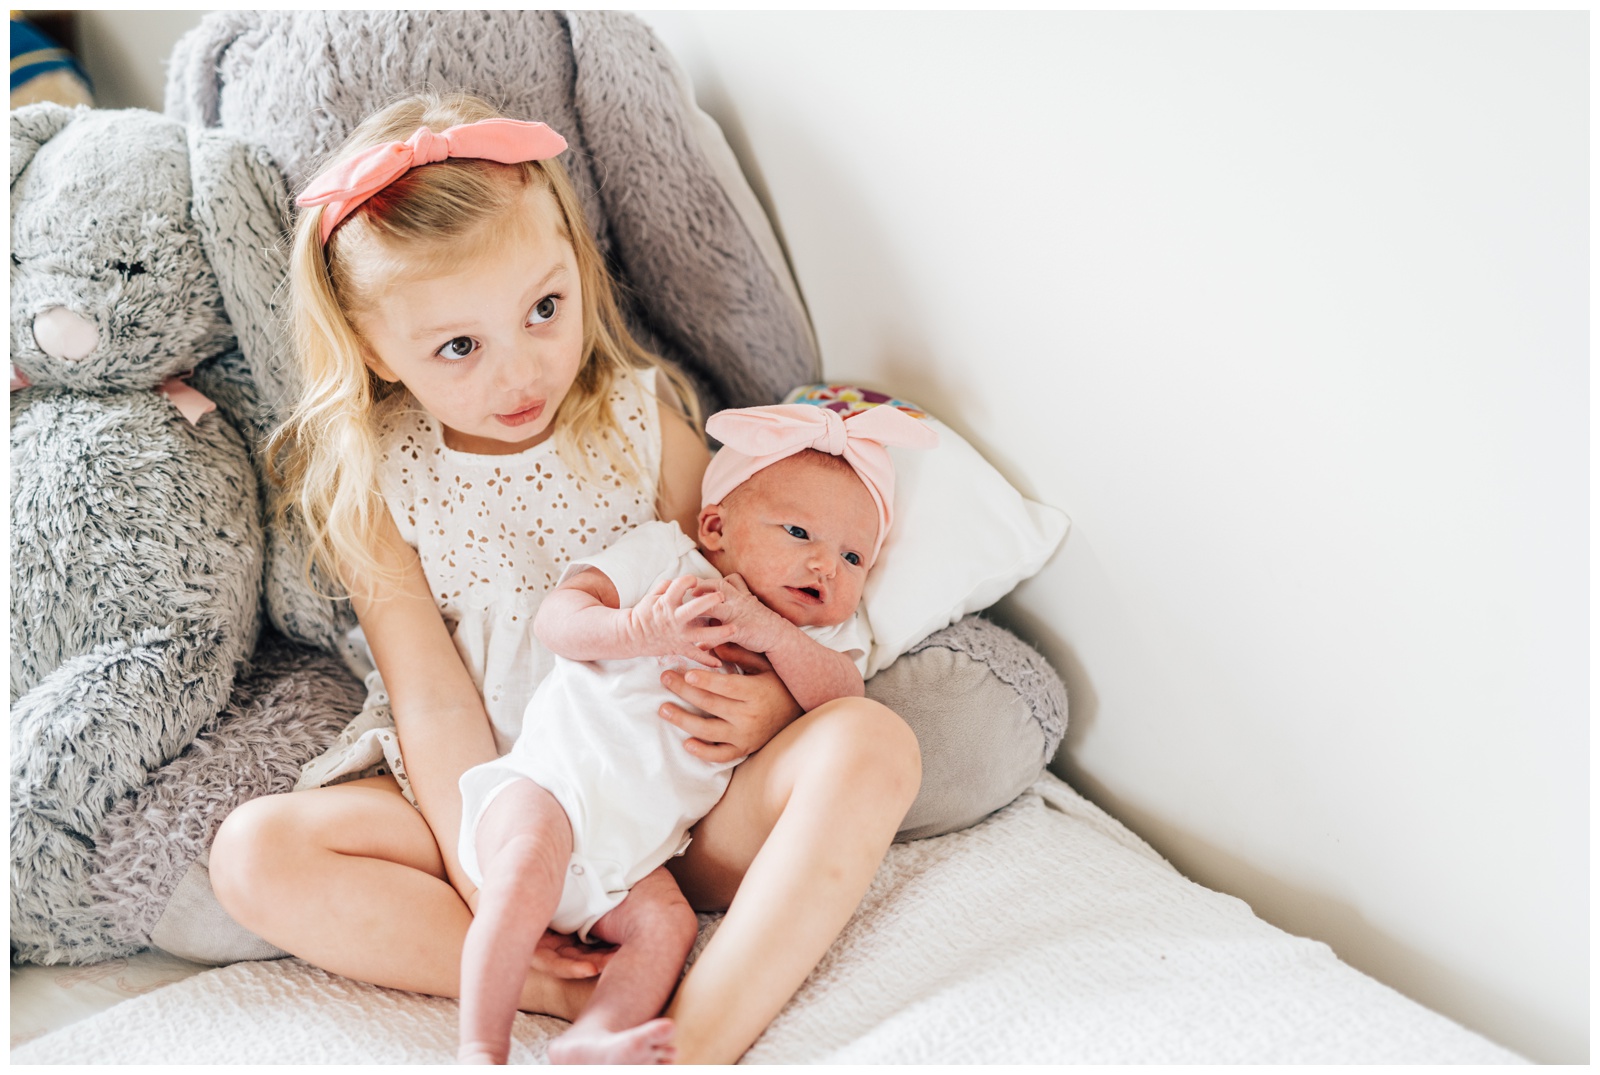 Newborn Lifestyle Photography,Girl,New Orleans,Louisiana,At Home,Family Photo Session,Big Sister,Natural Light,Gender Neutral Clothes,Spearmint Baby Clothes,New Orleans Family Photographer,